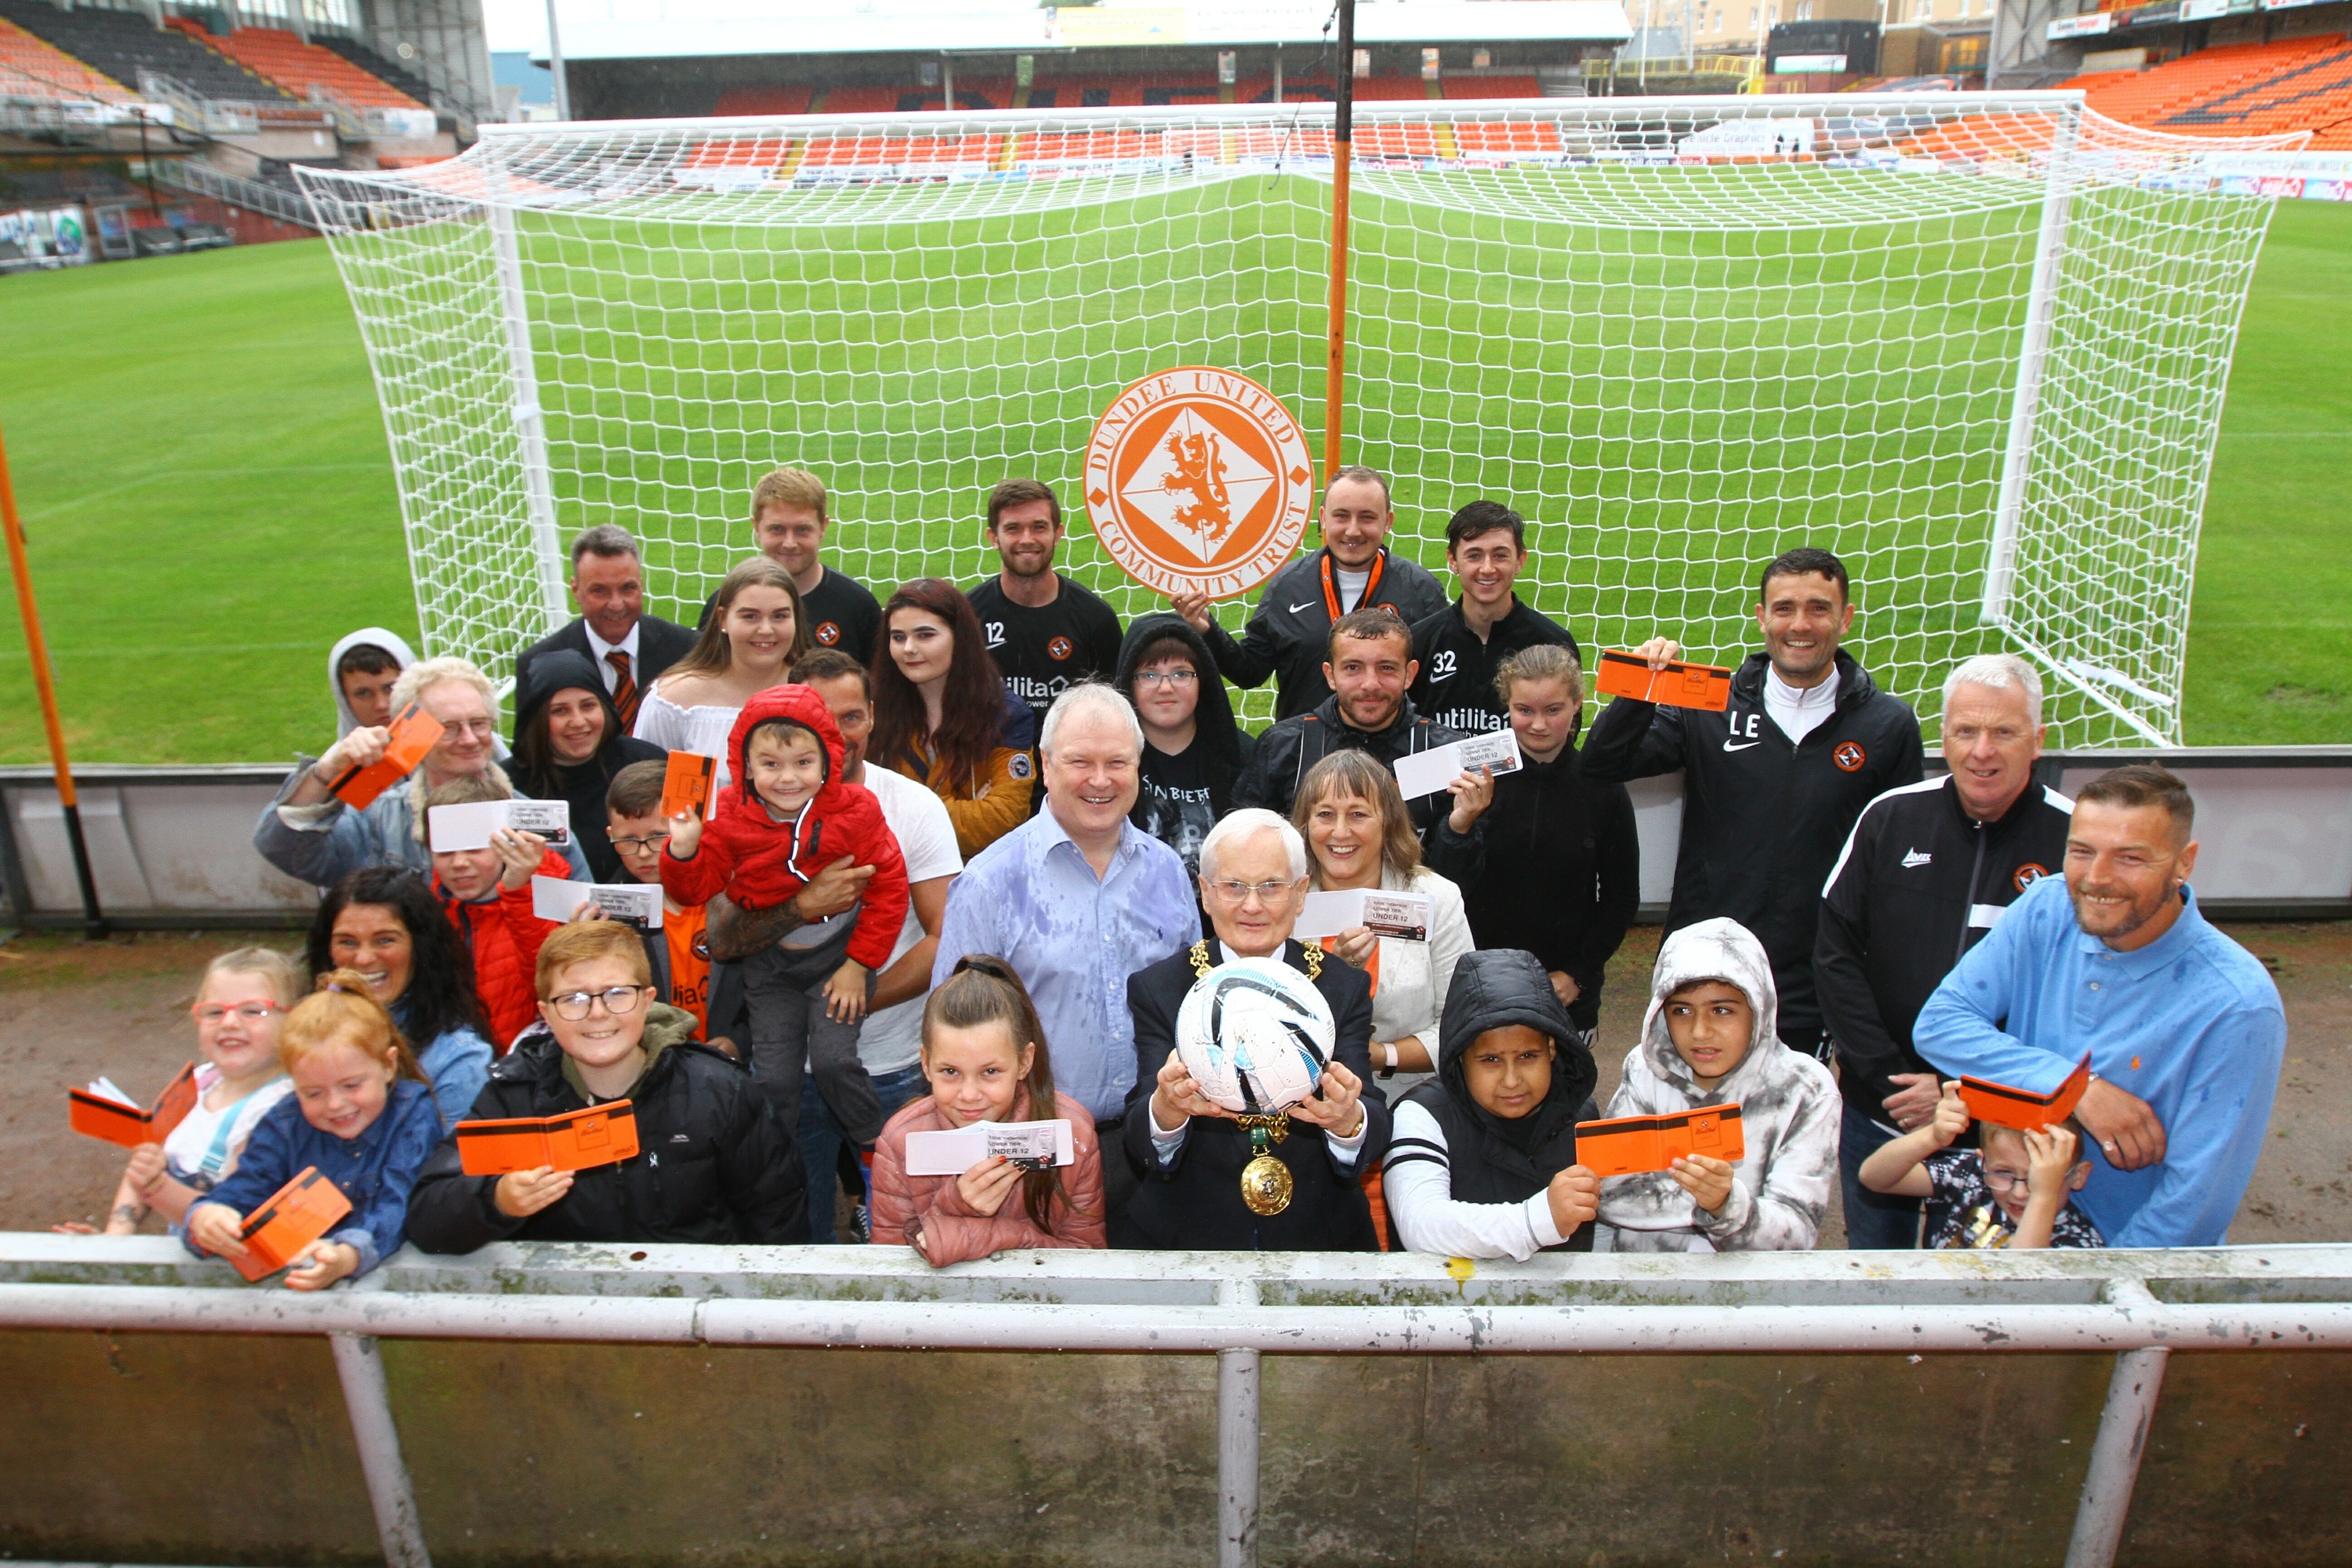 The Dundee United tickets for kids scheme, launched at Tannadice.